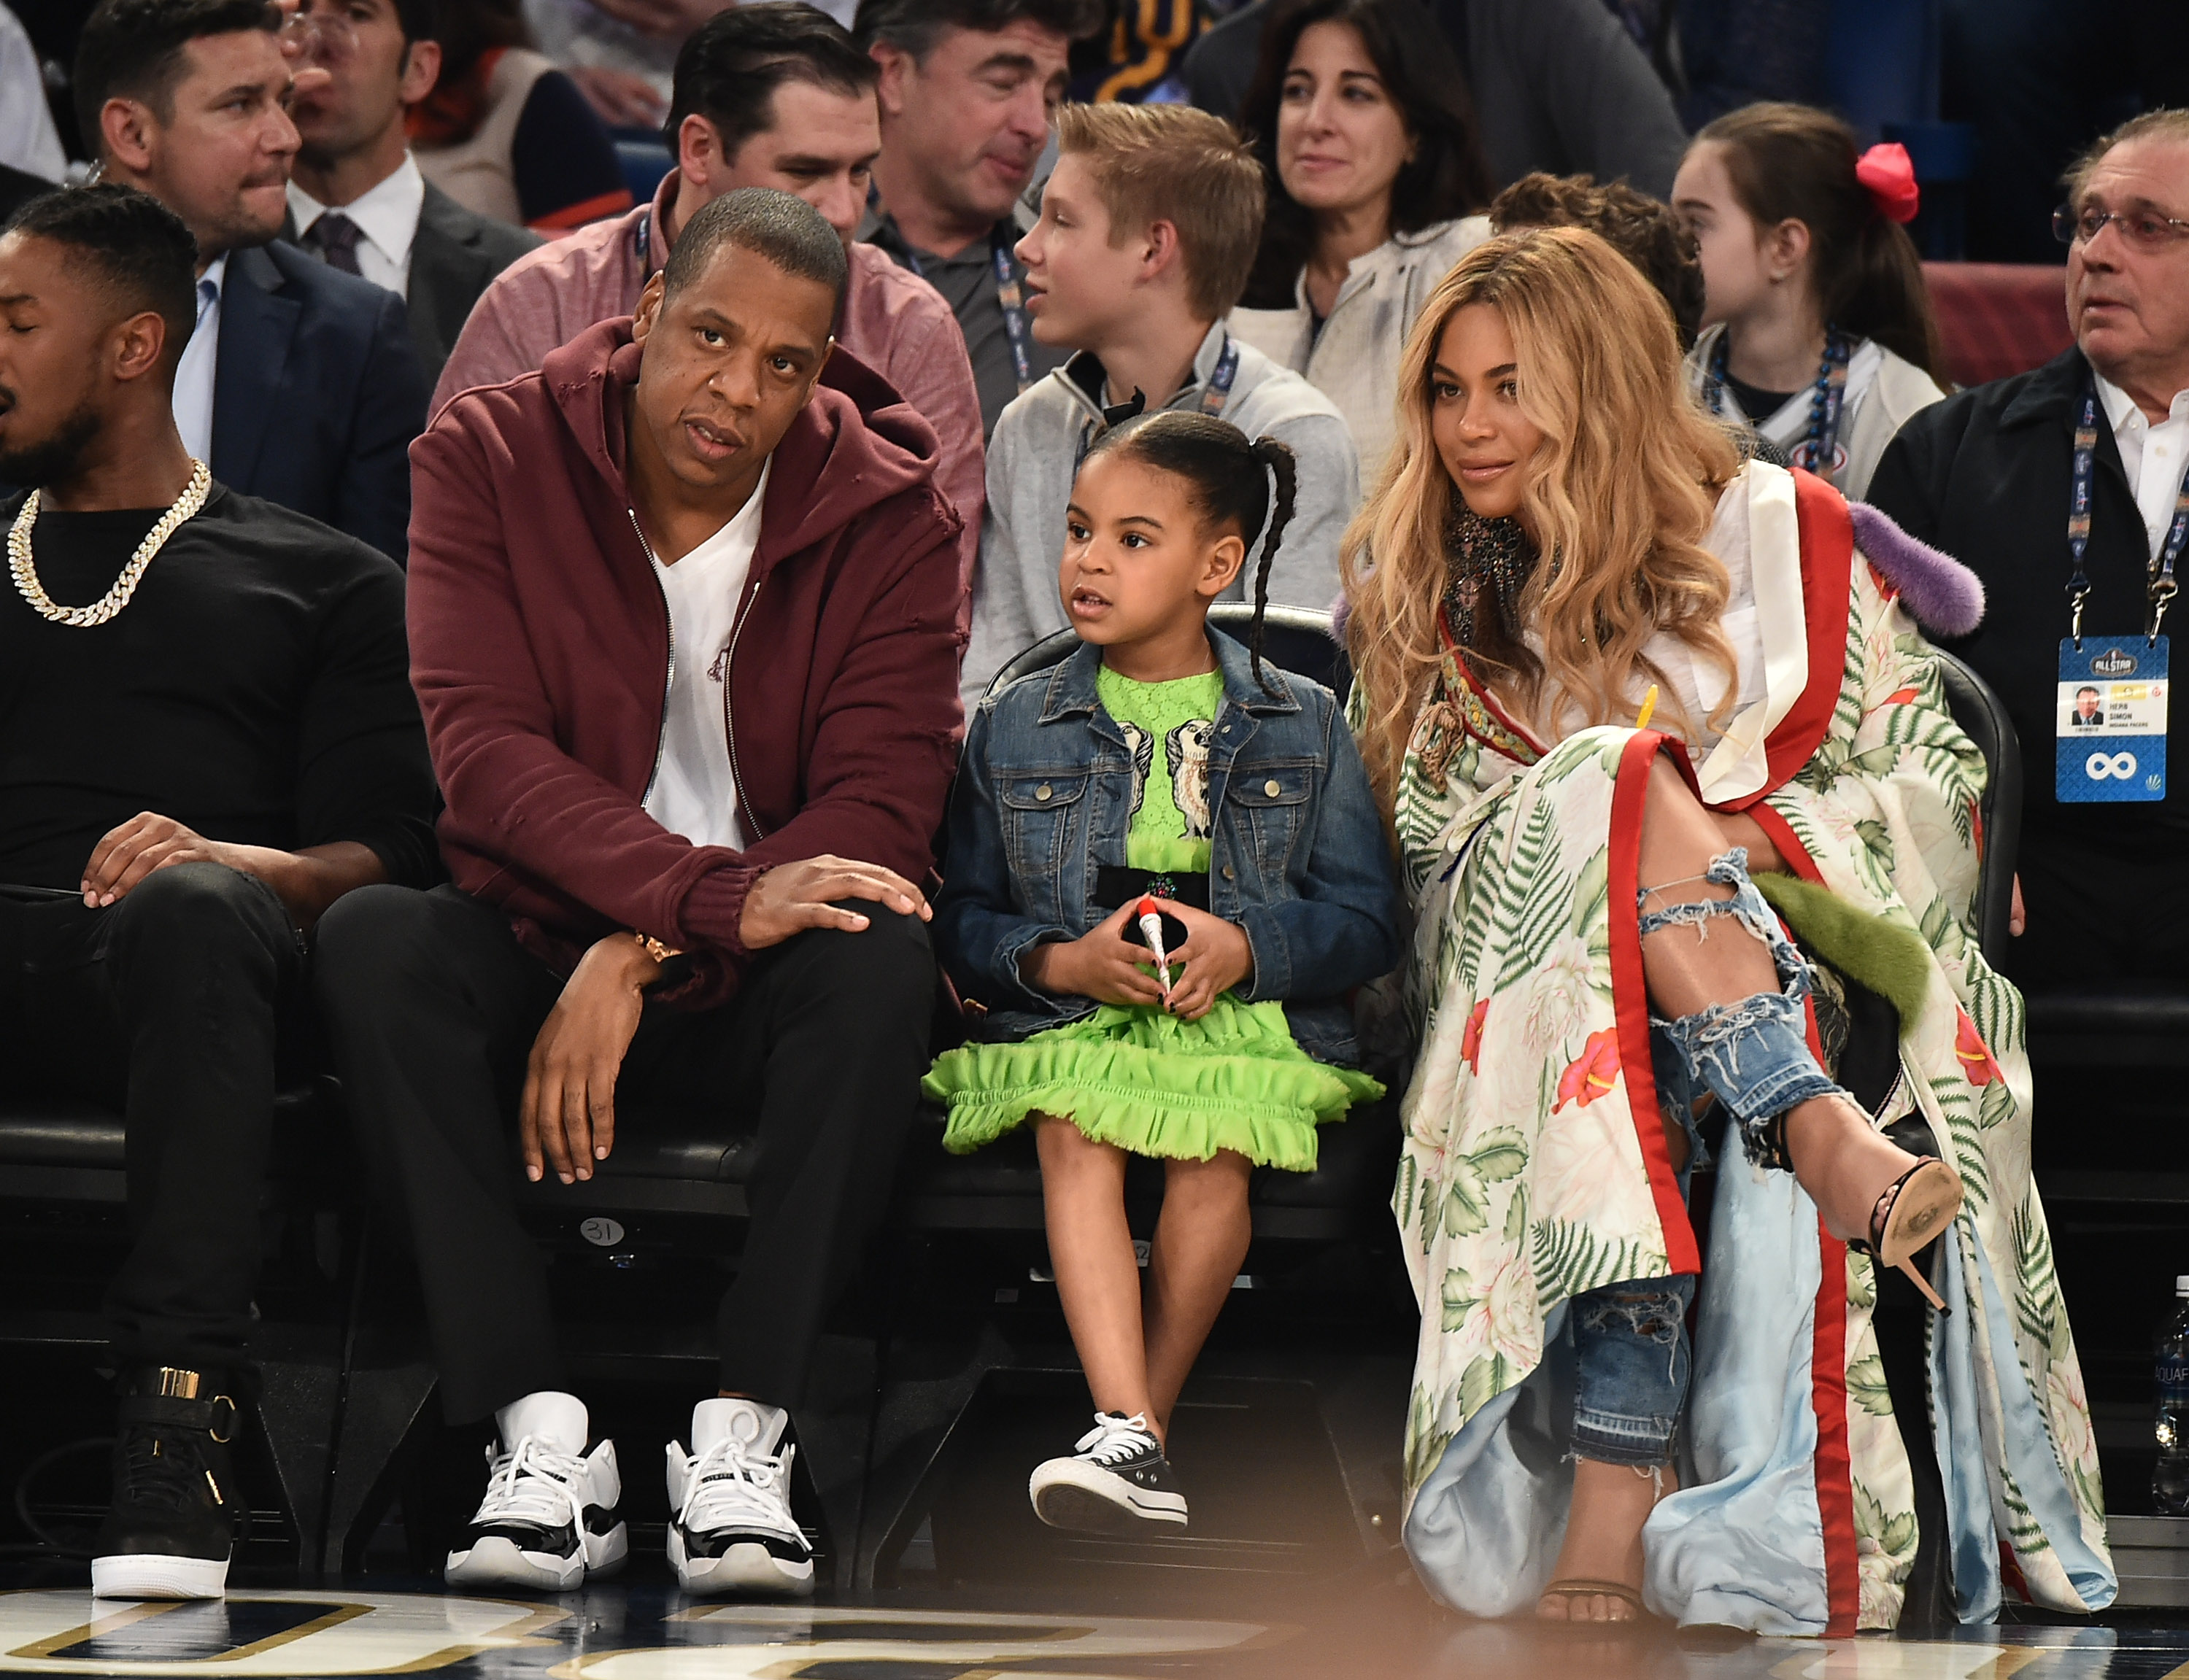 Celebrities Attend The 66th NBA All-Star Game